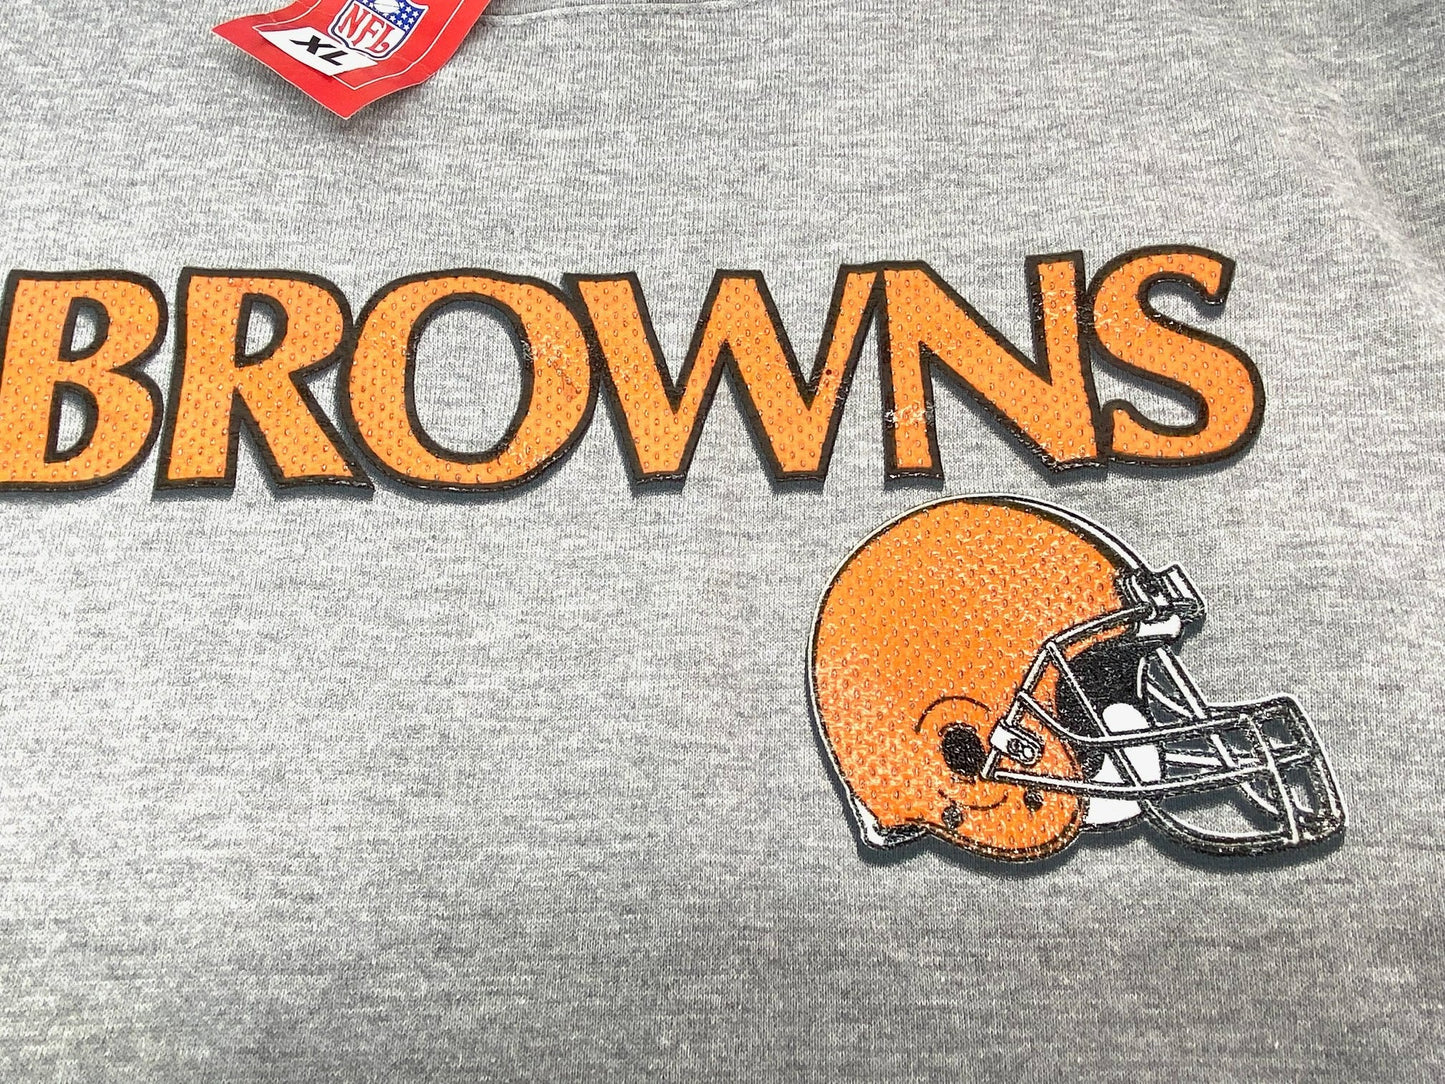 Cleveland Browns NFL 1999 Vintage Gray Sweatshirt Size XL by NFL/VF Imagewear